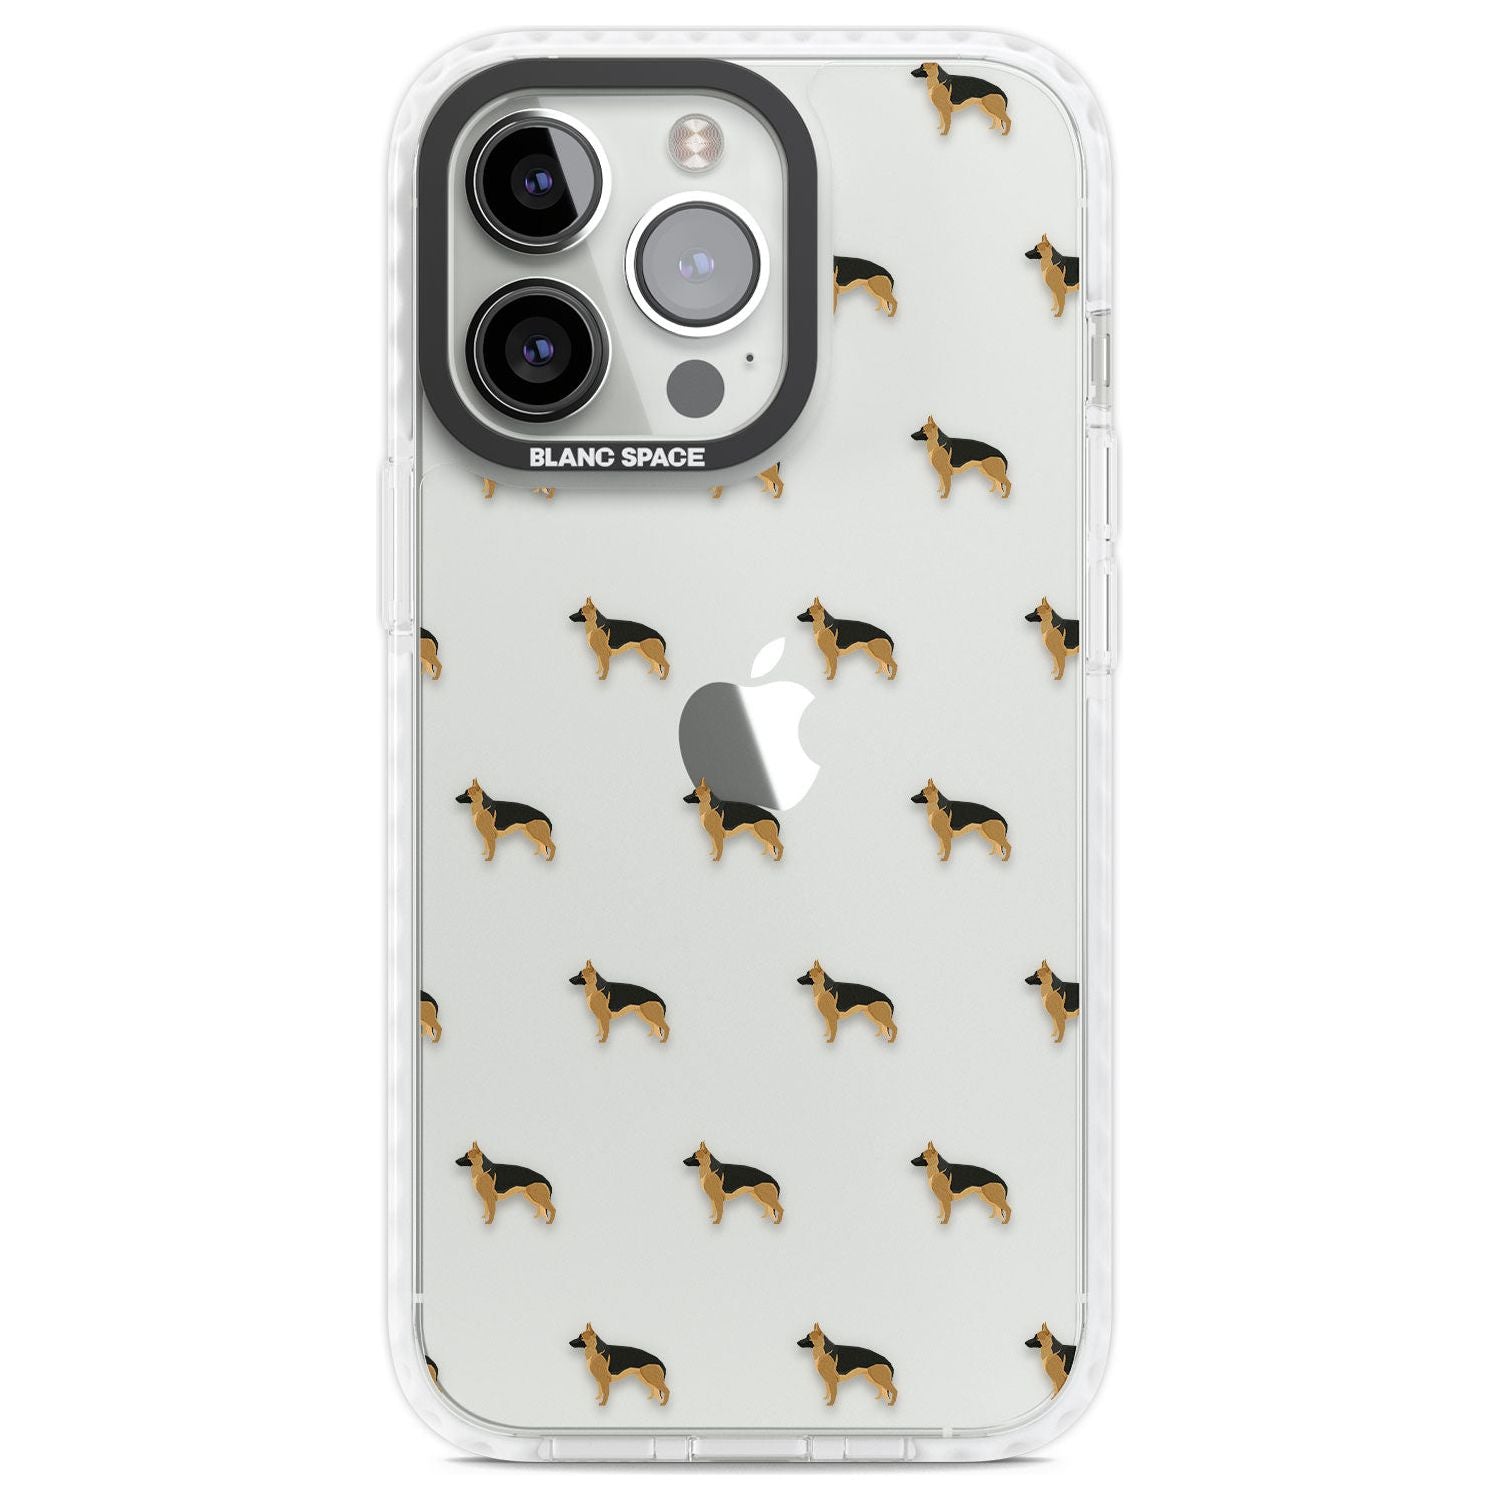 German Sherpard Dog Pattern Clear Phone Case iPhone 13 Pro / Impact Case,iPhone 14 Pro / Impact Case,iPhone 15 Pro Max / Impact Case,iPhone 15 Pro / Impact Case Blanc Space